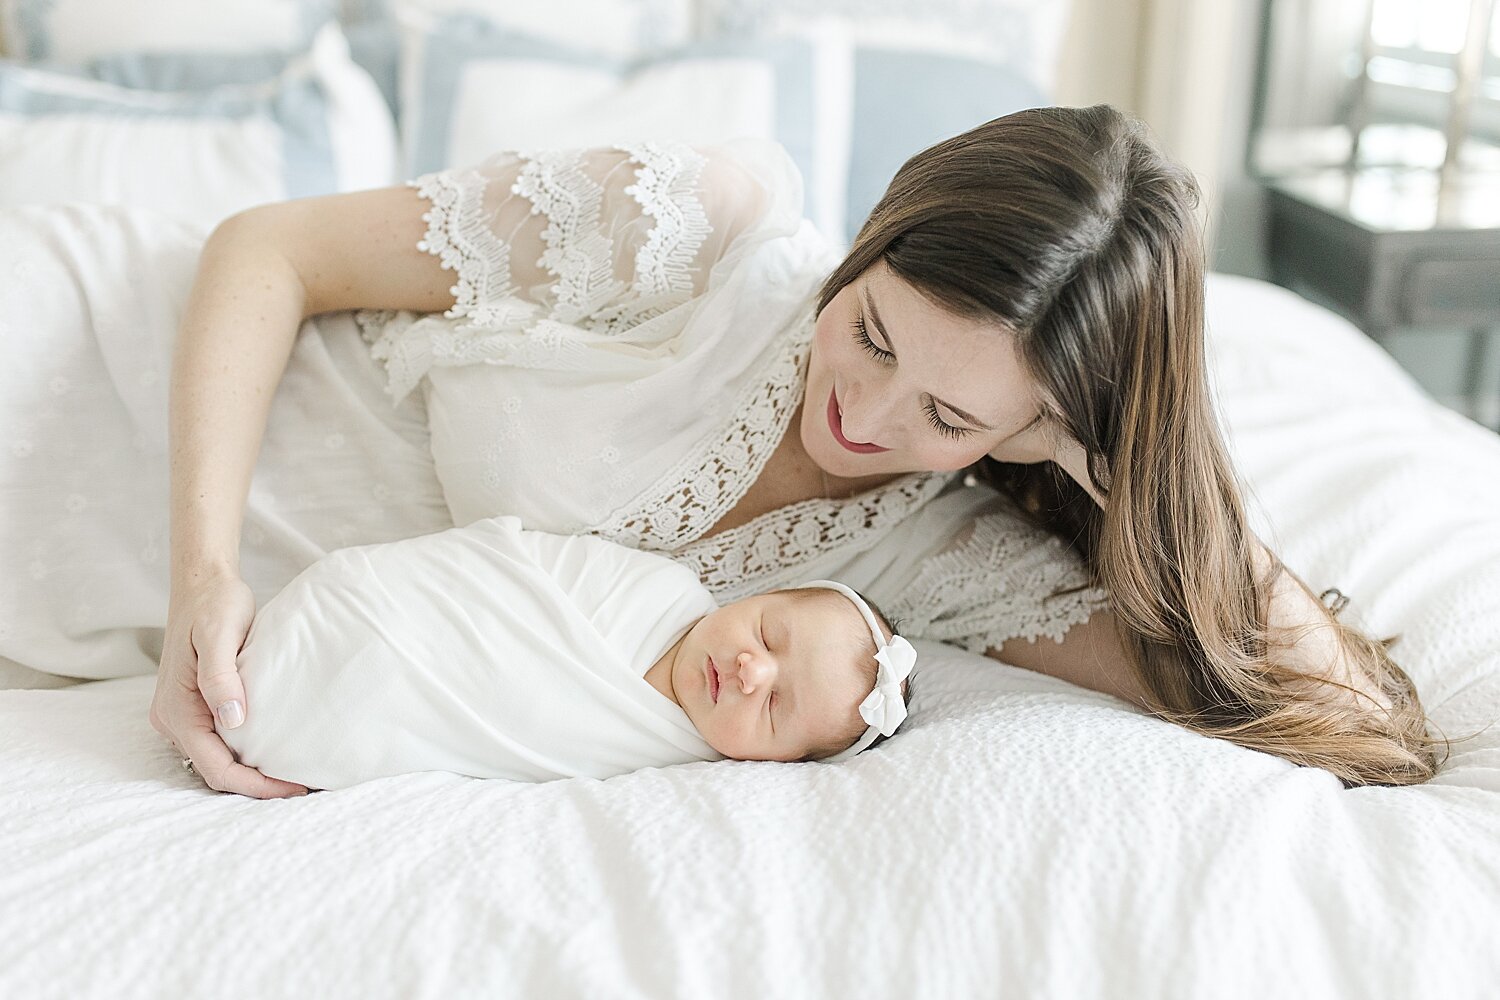 Mom curled up with her baby girl on the bed during their in-home lifestyle newborn session with Kristin Wood Photography.